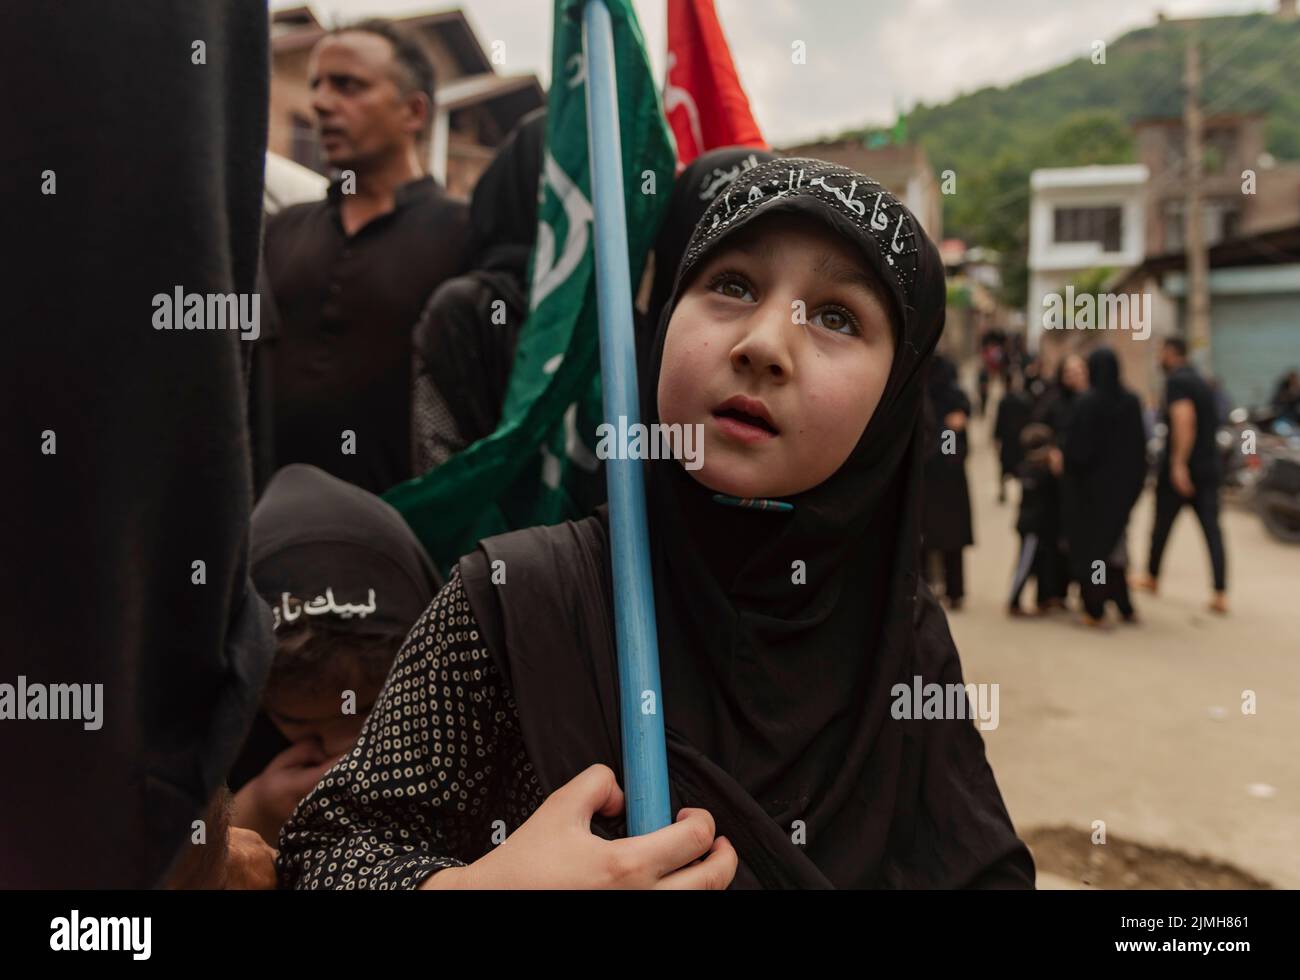 A Shia Muslim girl holds a religious flag as she participated in a religious procession on the 7th day of Muharram. Muharram is the first month of Islam. It is one of the holiest months on the Islamic calendar. Shia Muslims commemorate Muharram as a month of mourning in remembrance of the martyrdom of the Islamic Prophet Muhammad's grandson Imam Hussain, who was killed on Ashura (10th day of Muharram) in the battle of Karbala in 680 A.D. Stock Photo